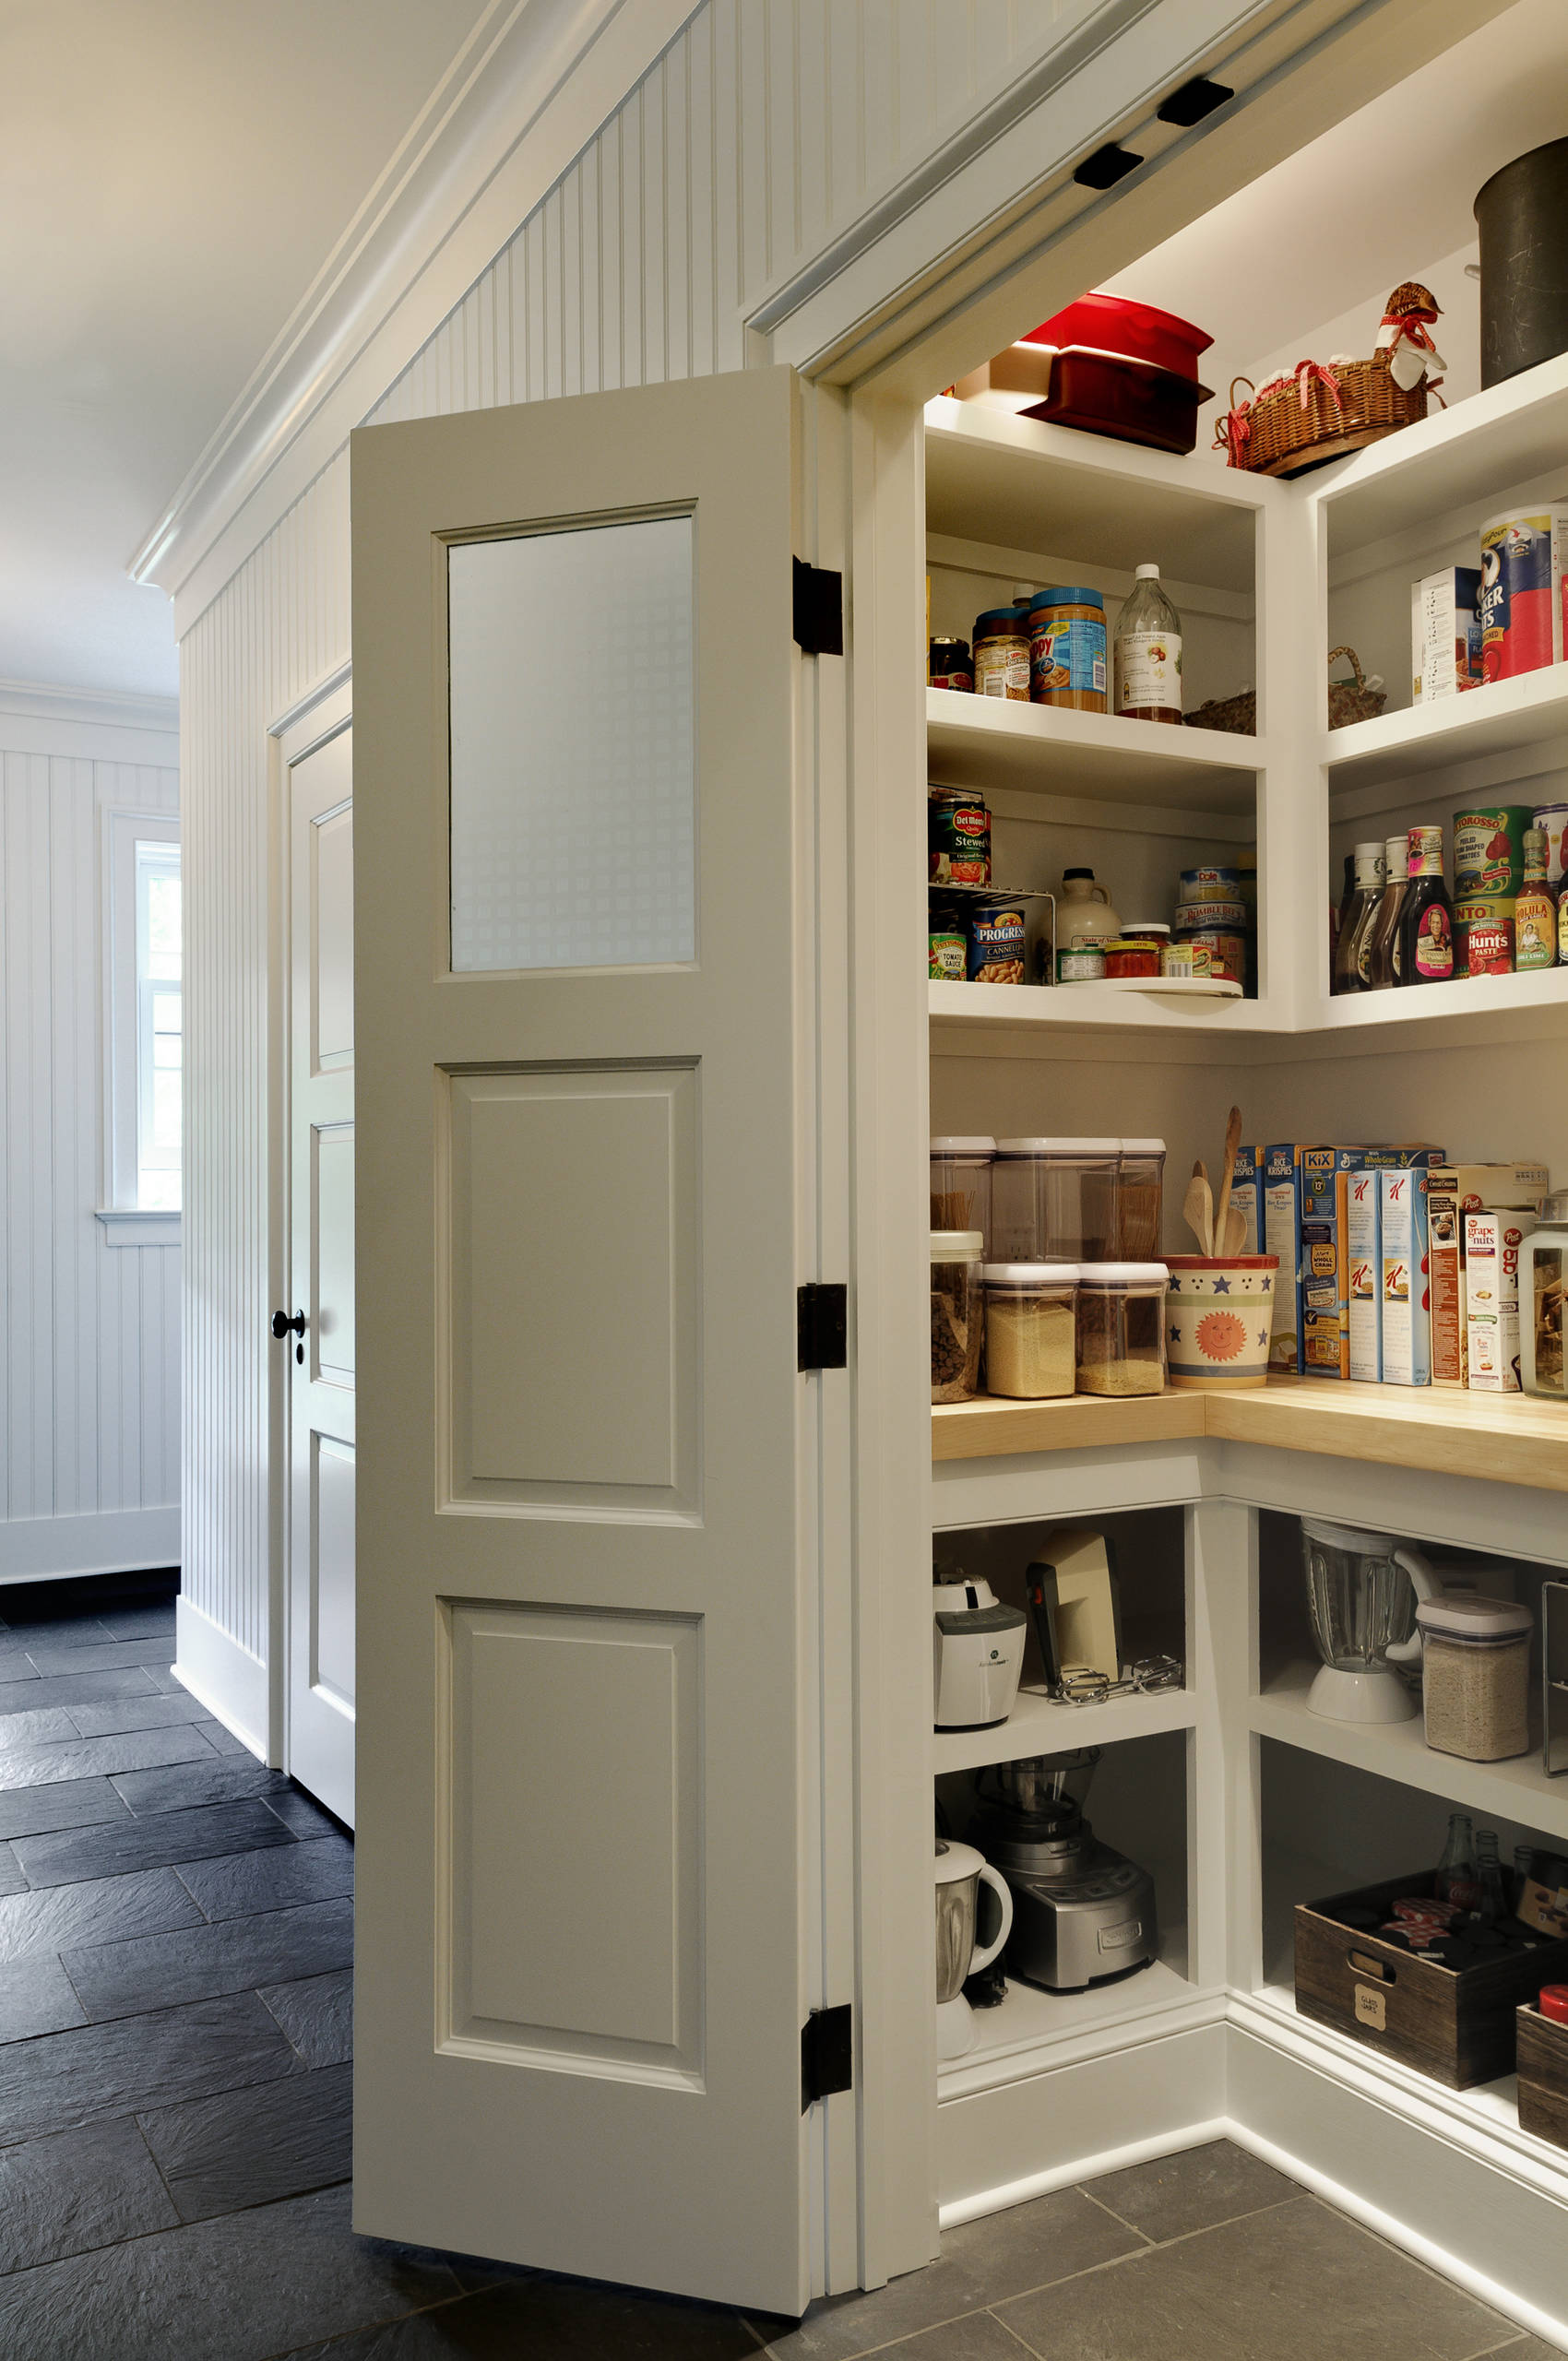 18 Kitchen Pantry Ideas You'll Love   September, 18   Houzz